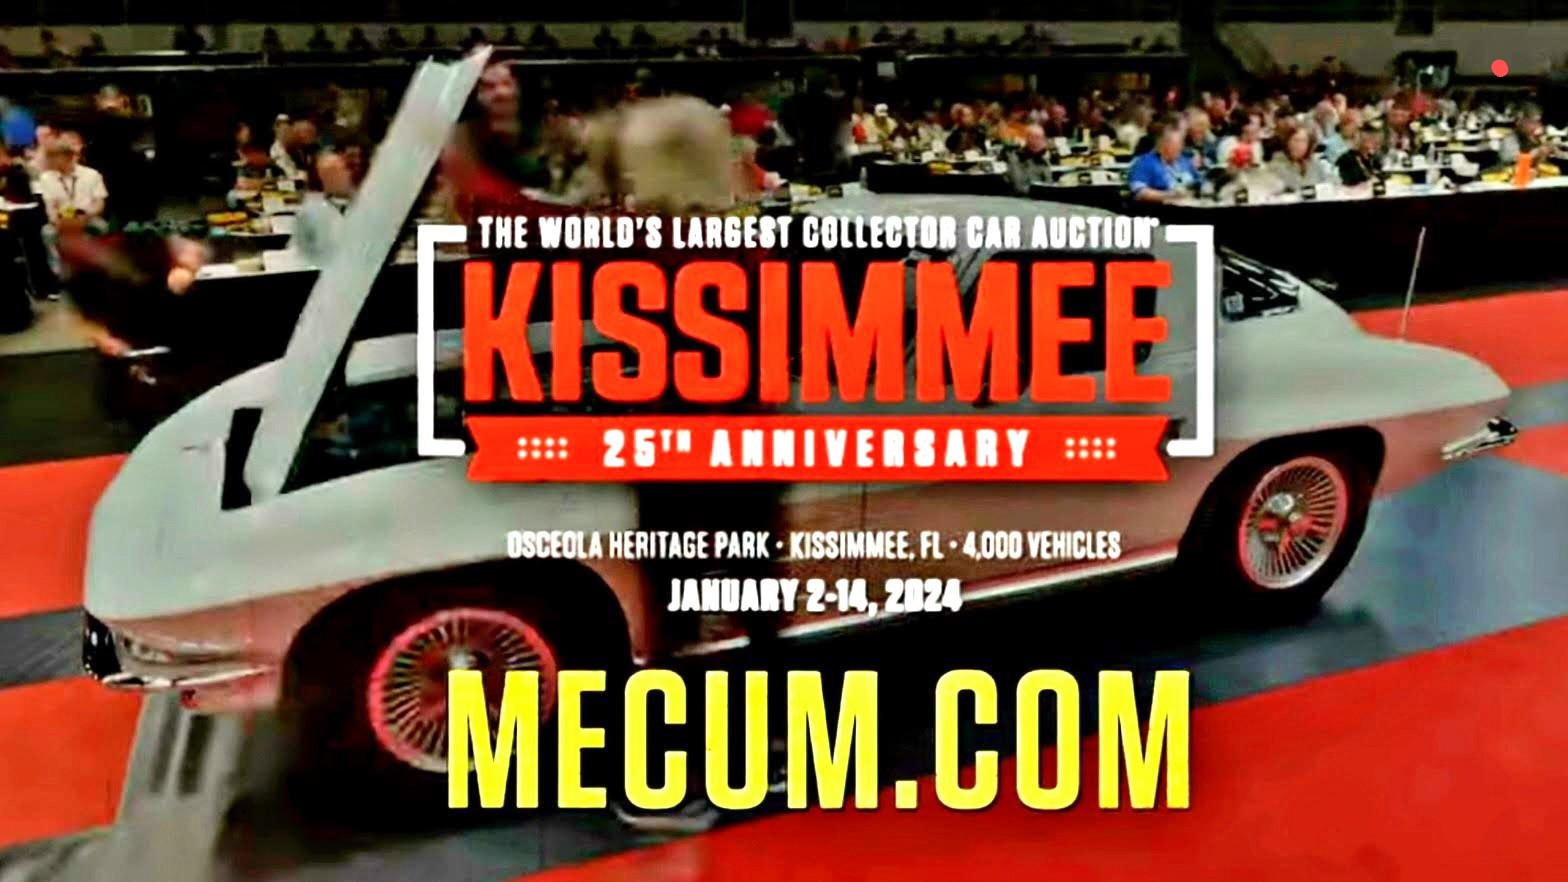 Mecum Auction From Inside the Osceola Heritage Park Kissimmee Live